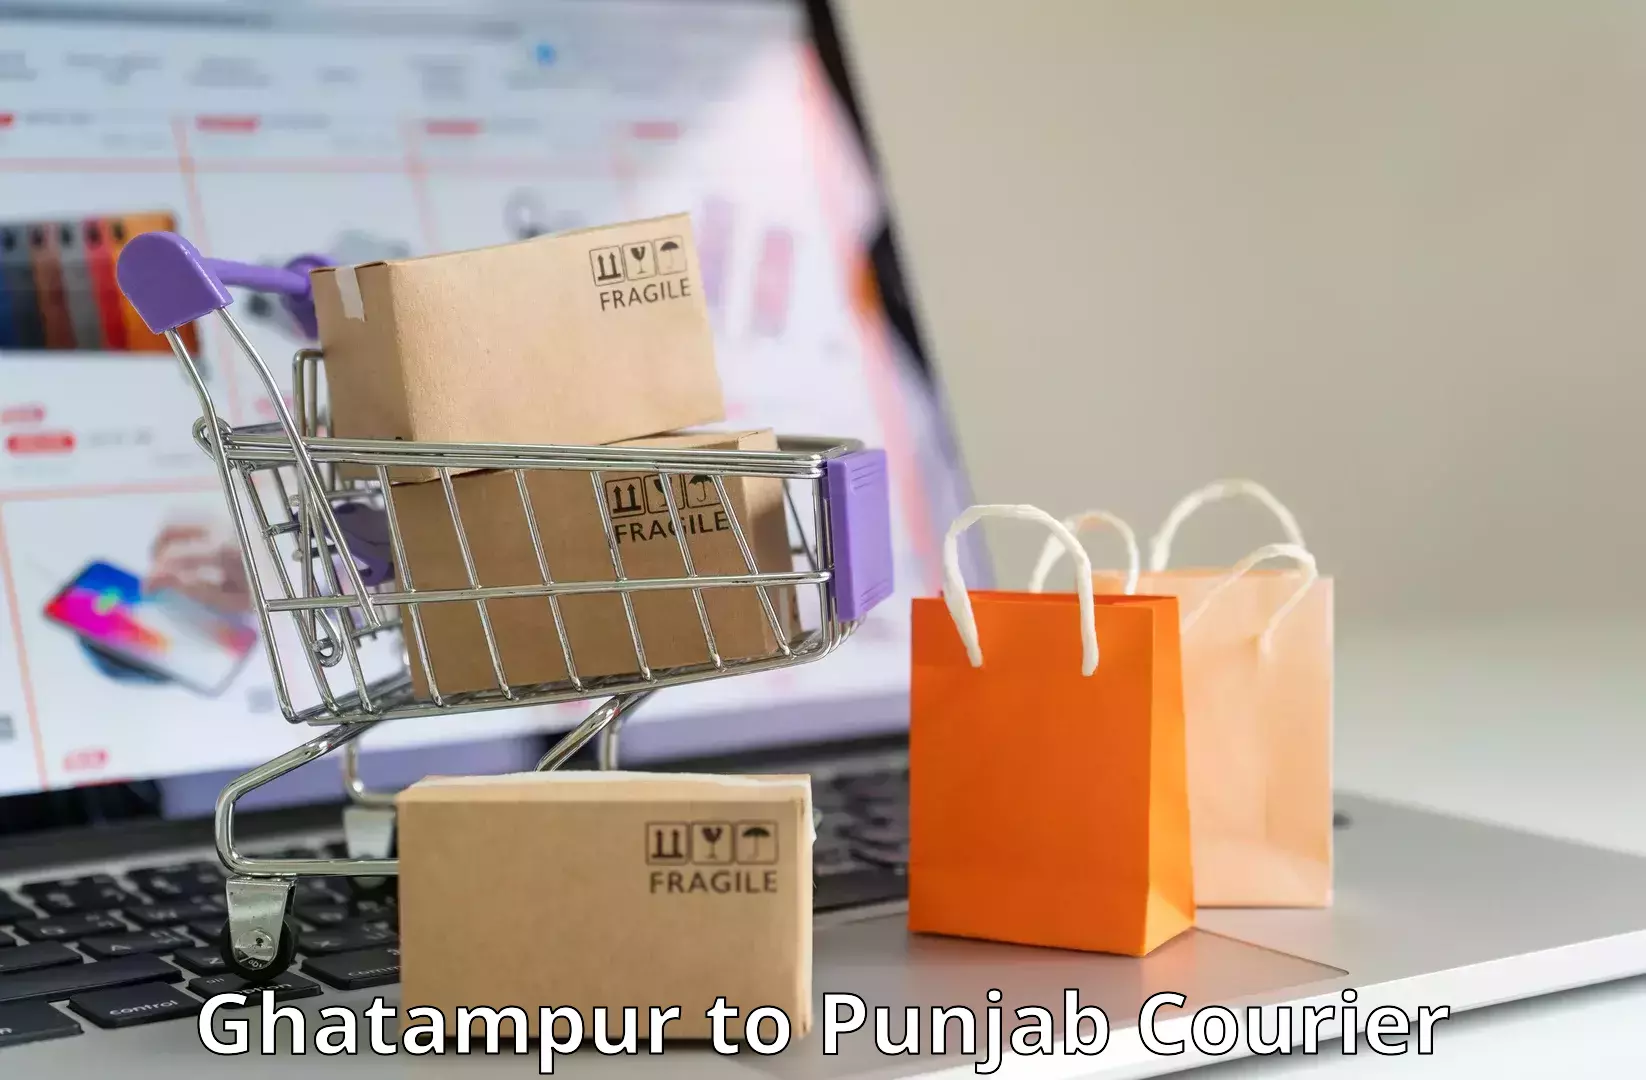 Urban courier service Ghatampur to Amritsar